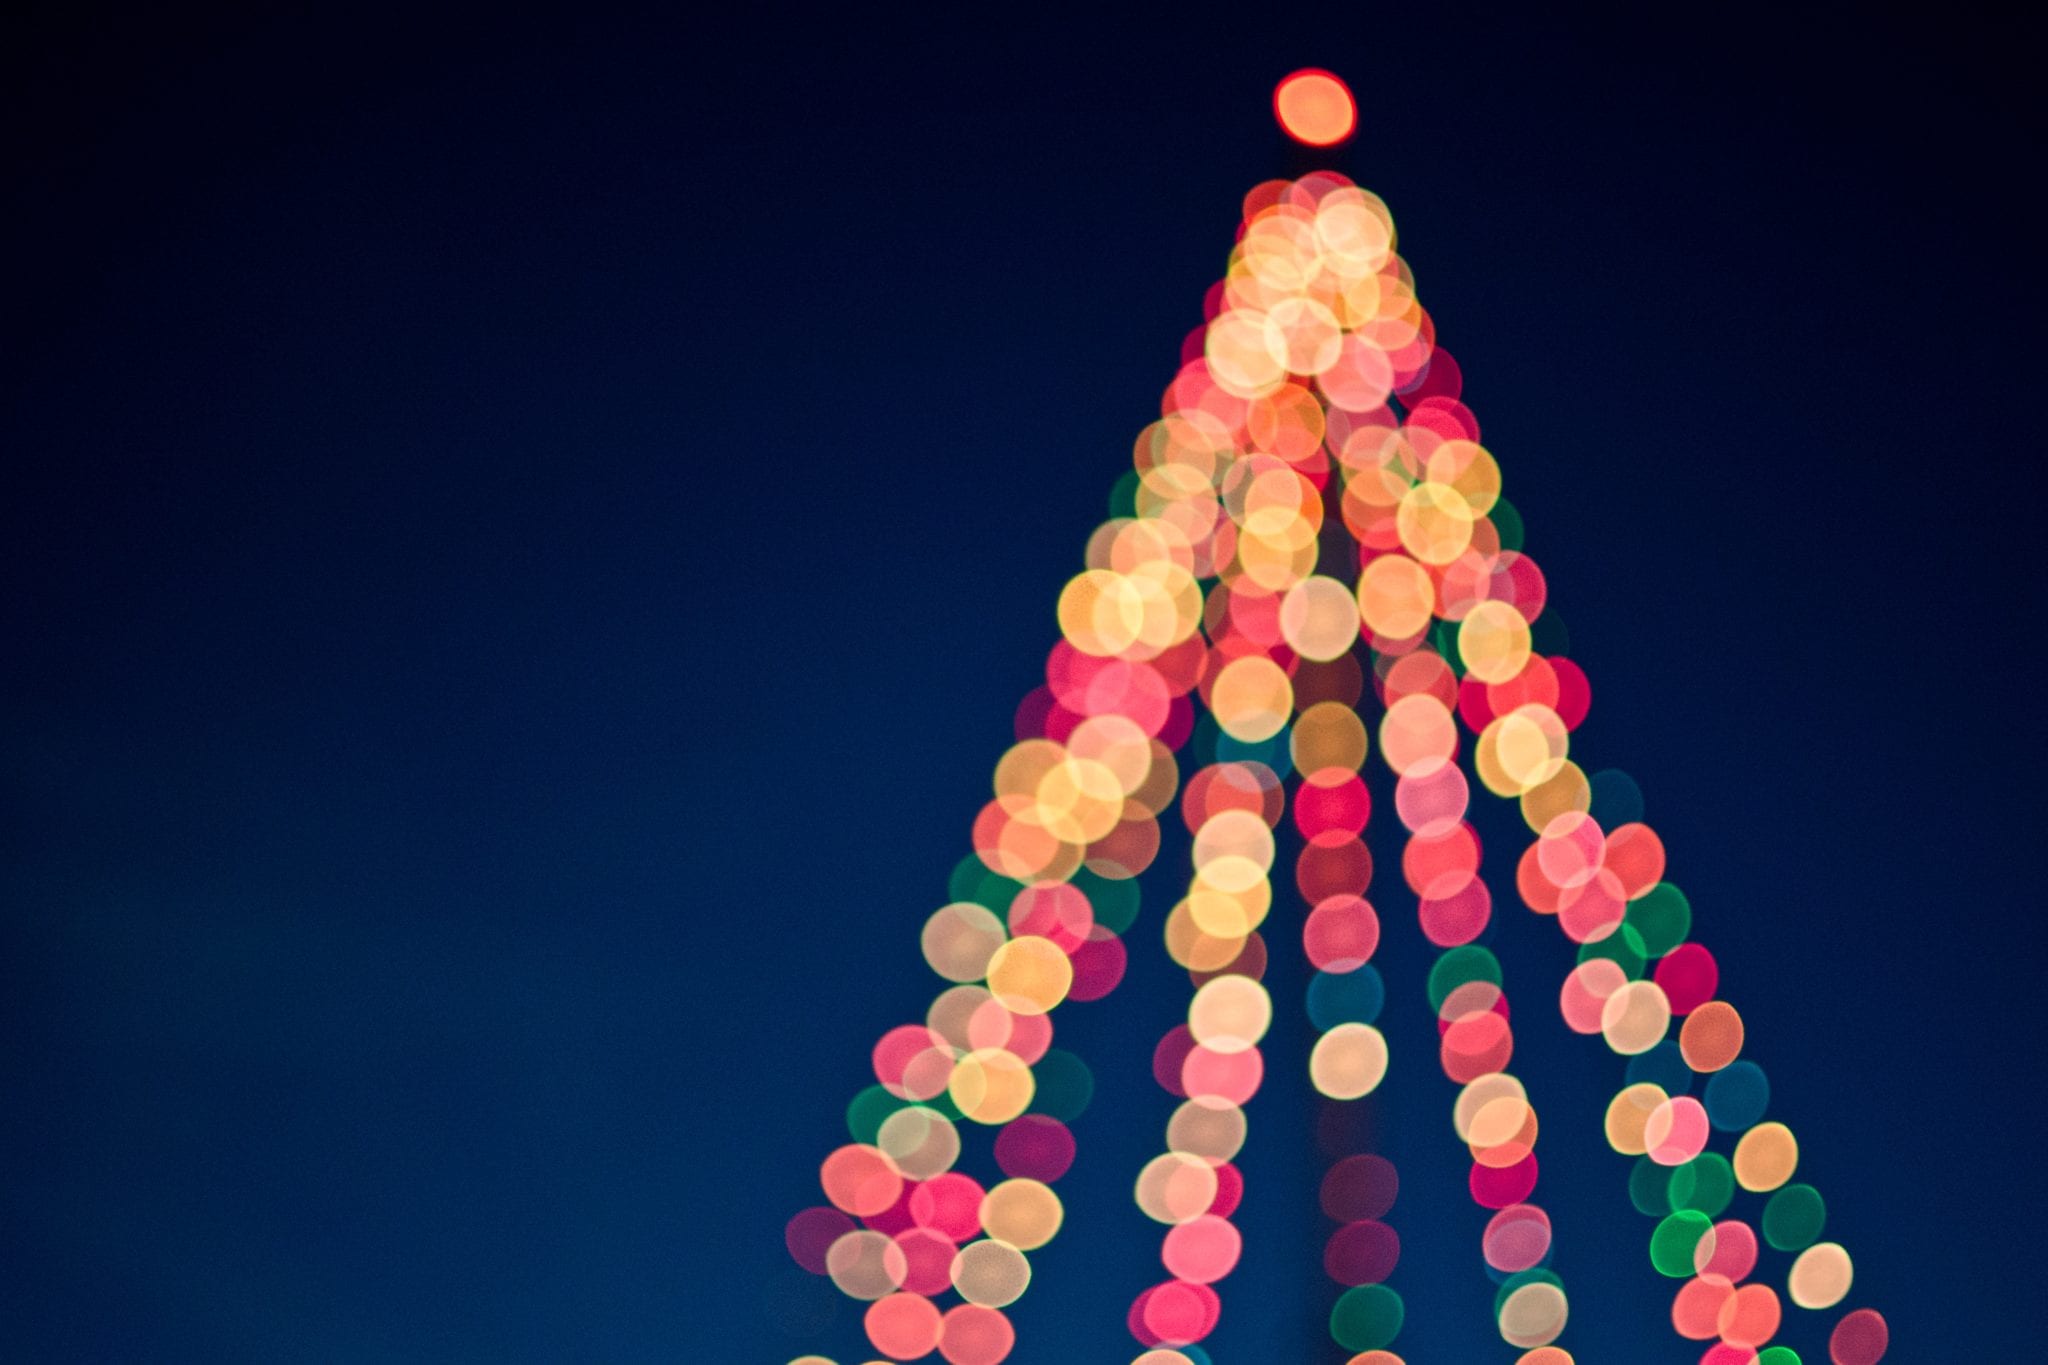 Is Your Christmas Digital PR Strategy in Place?